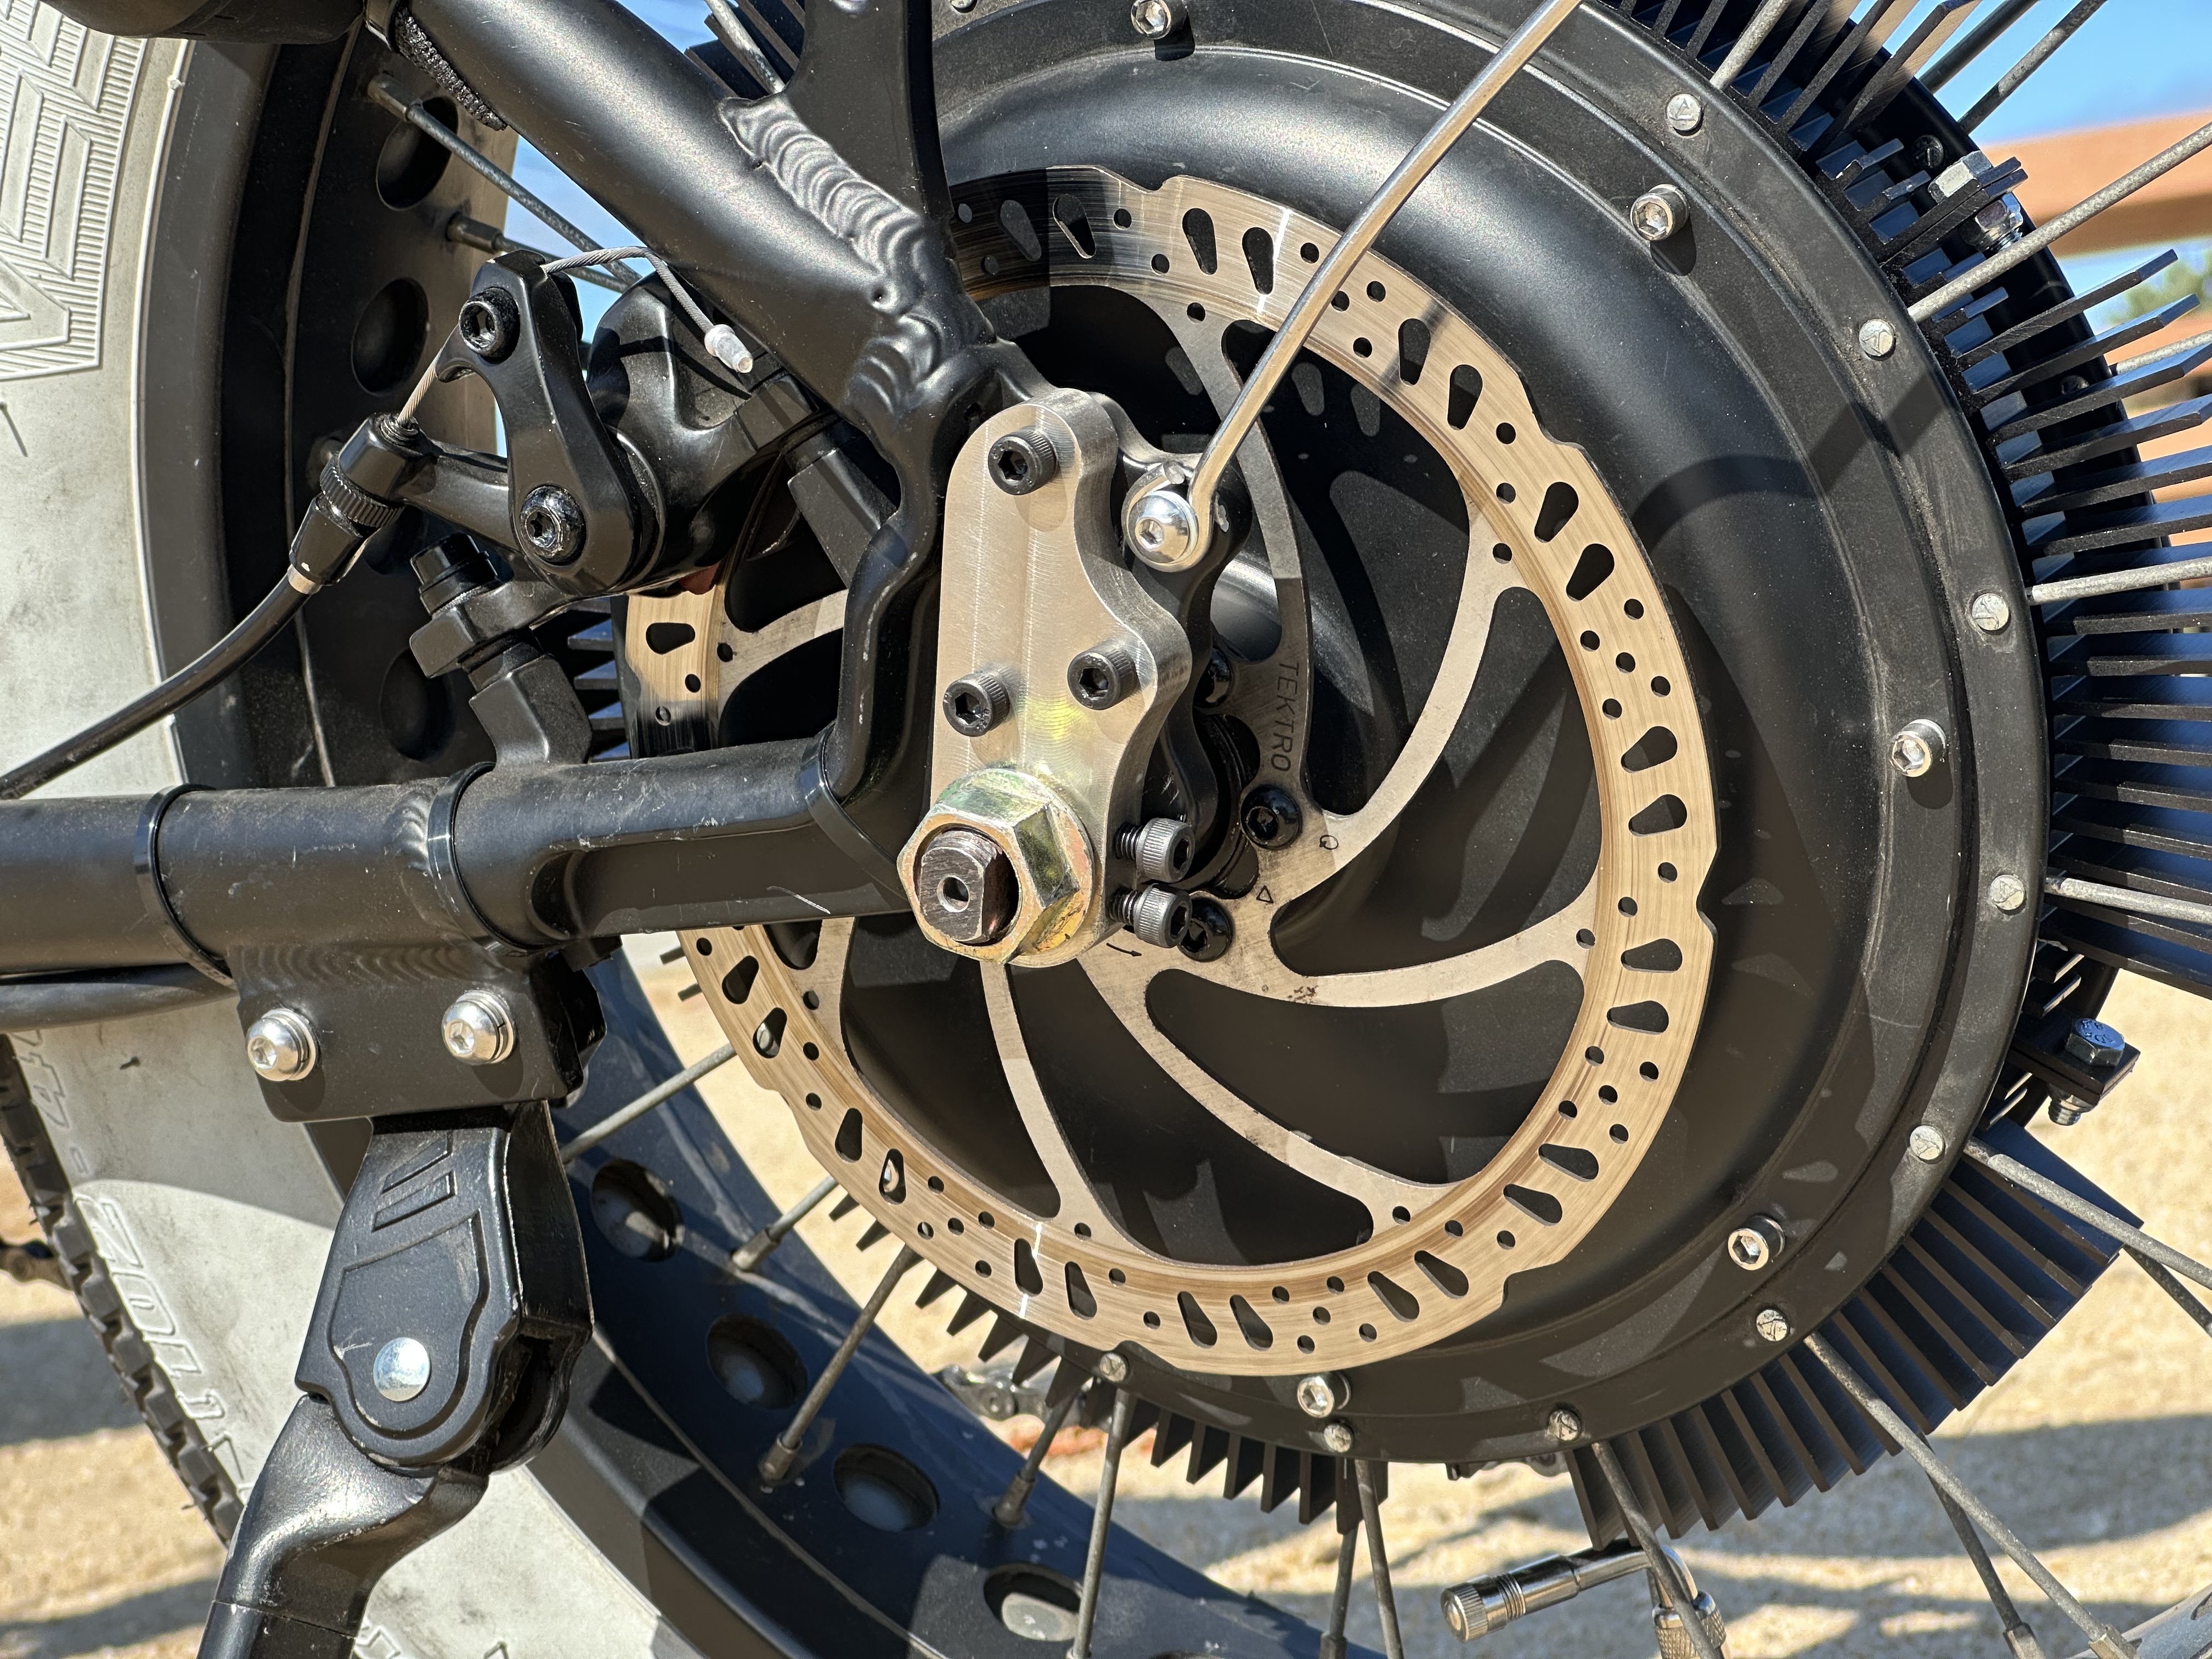 Closeup of the bikes rear tire, left side, focused on the torque arm